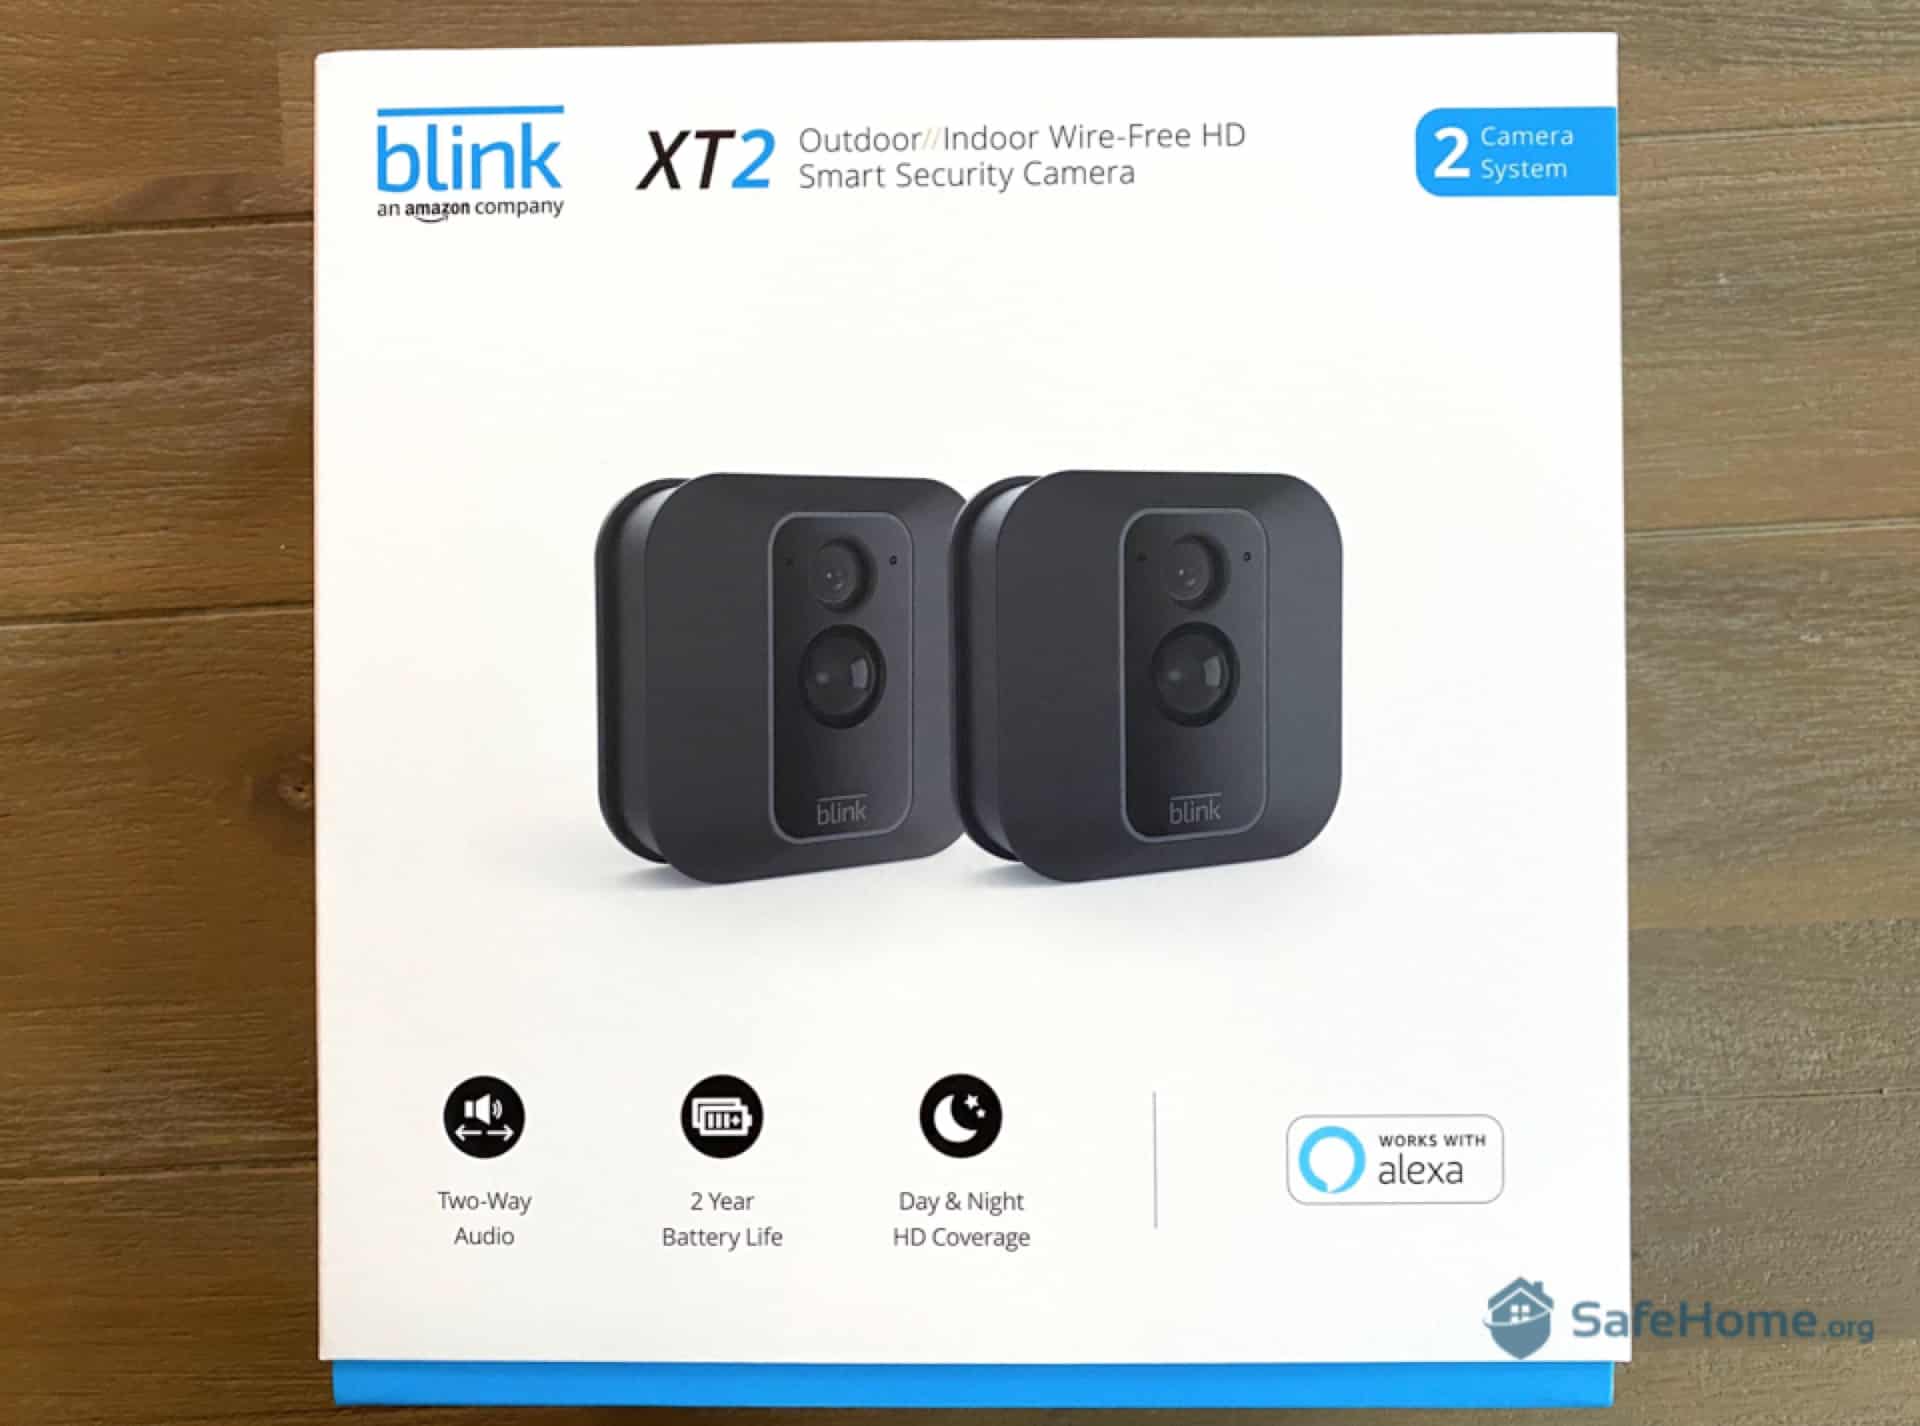 Blink Reviews 2020: The Only Blink Camera Review You Need to Read